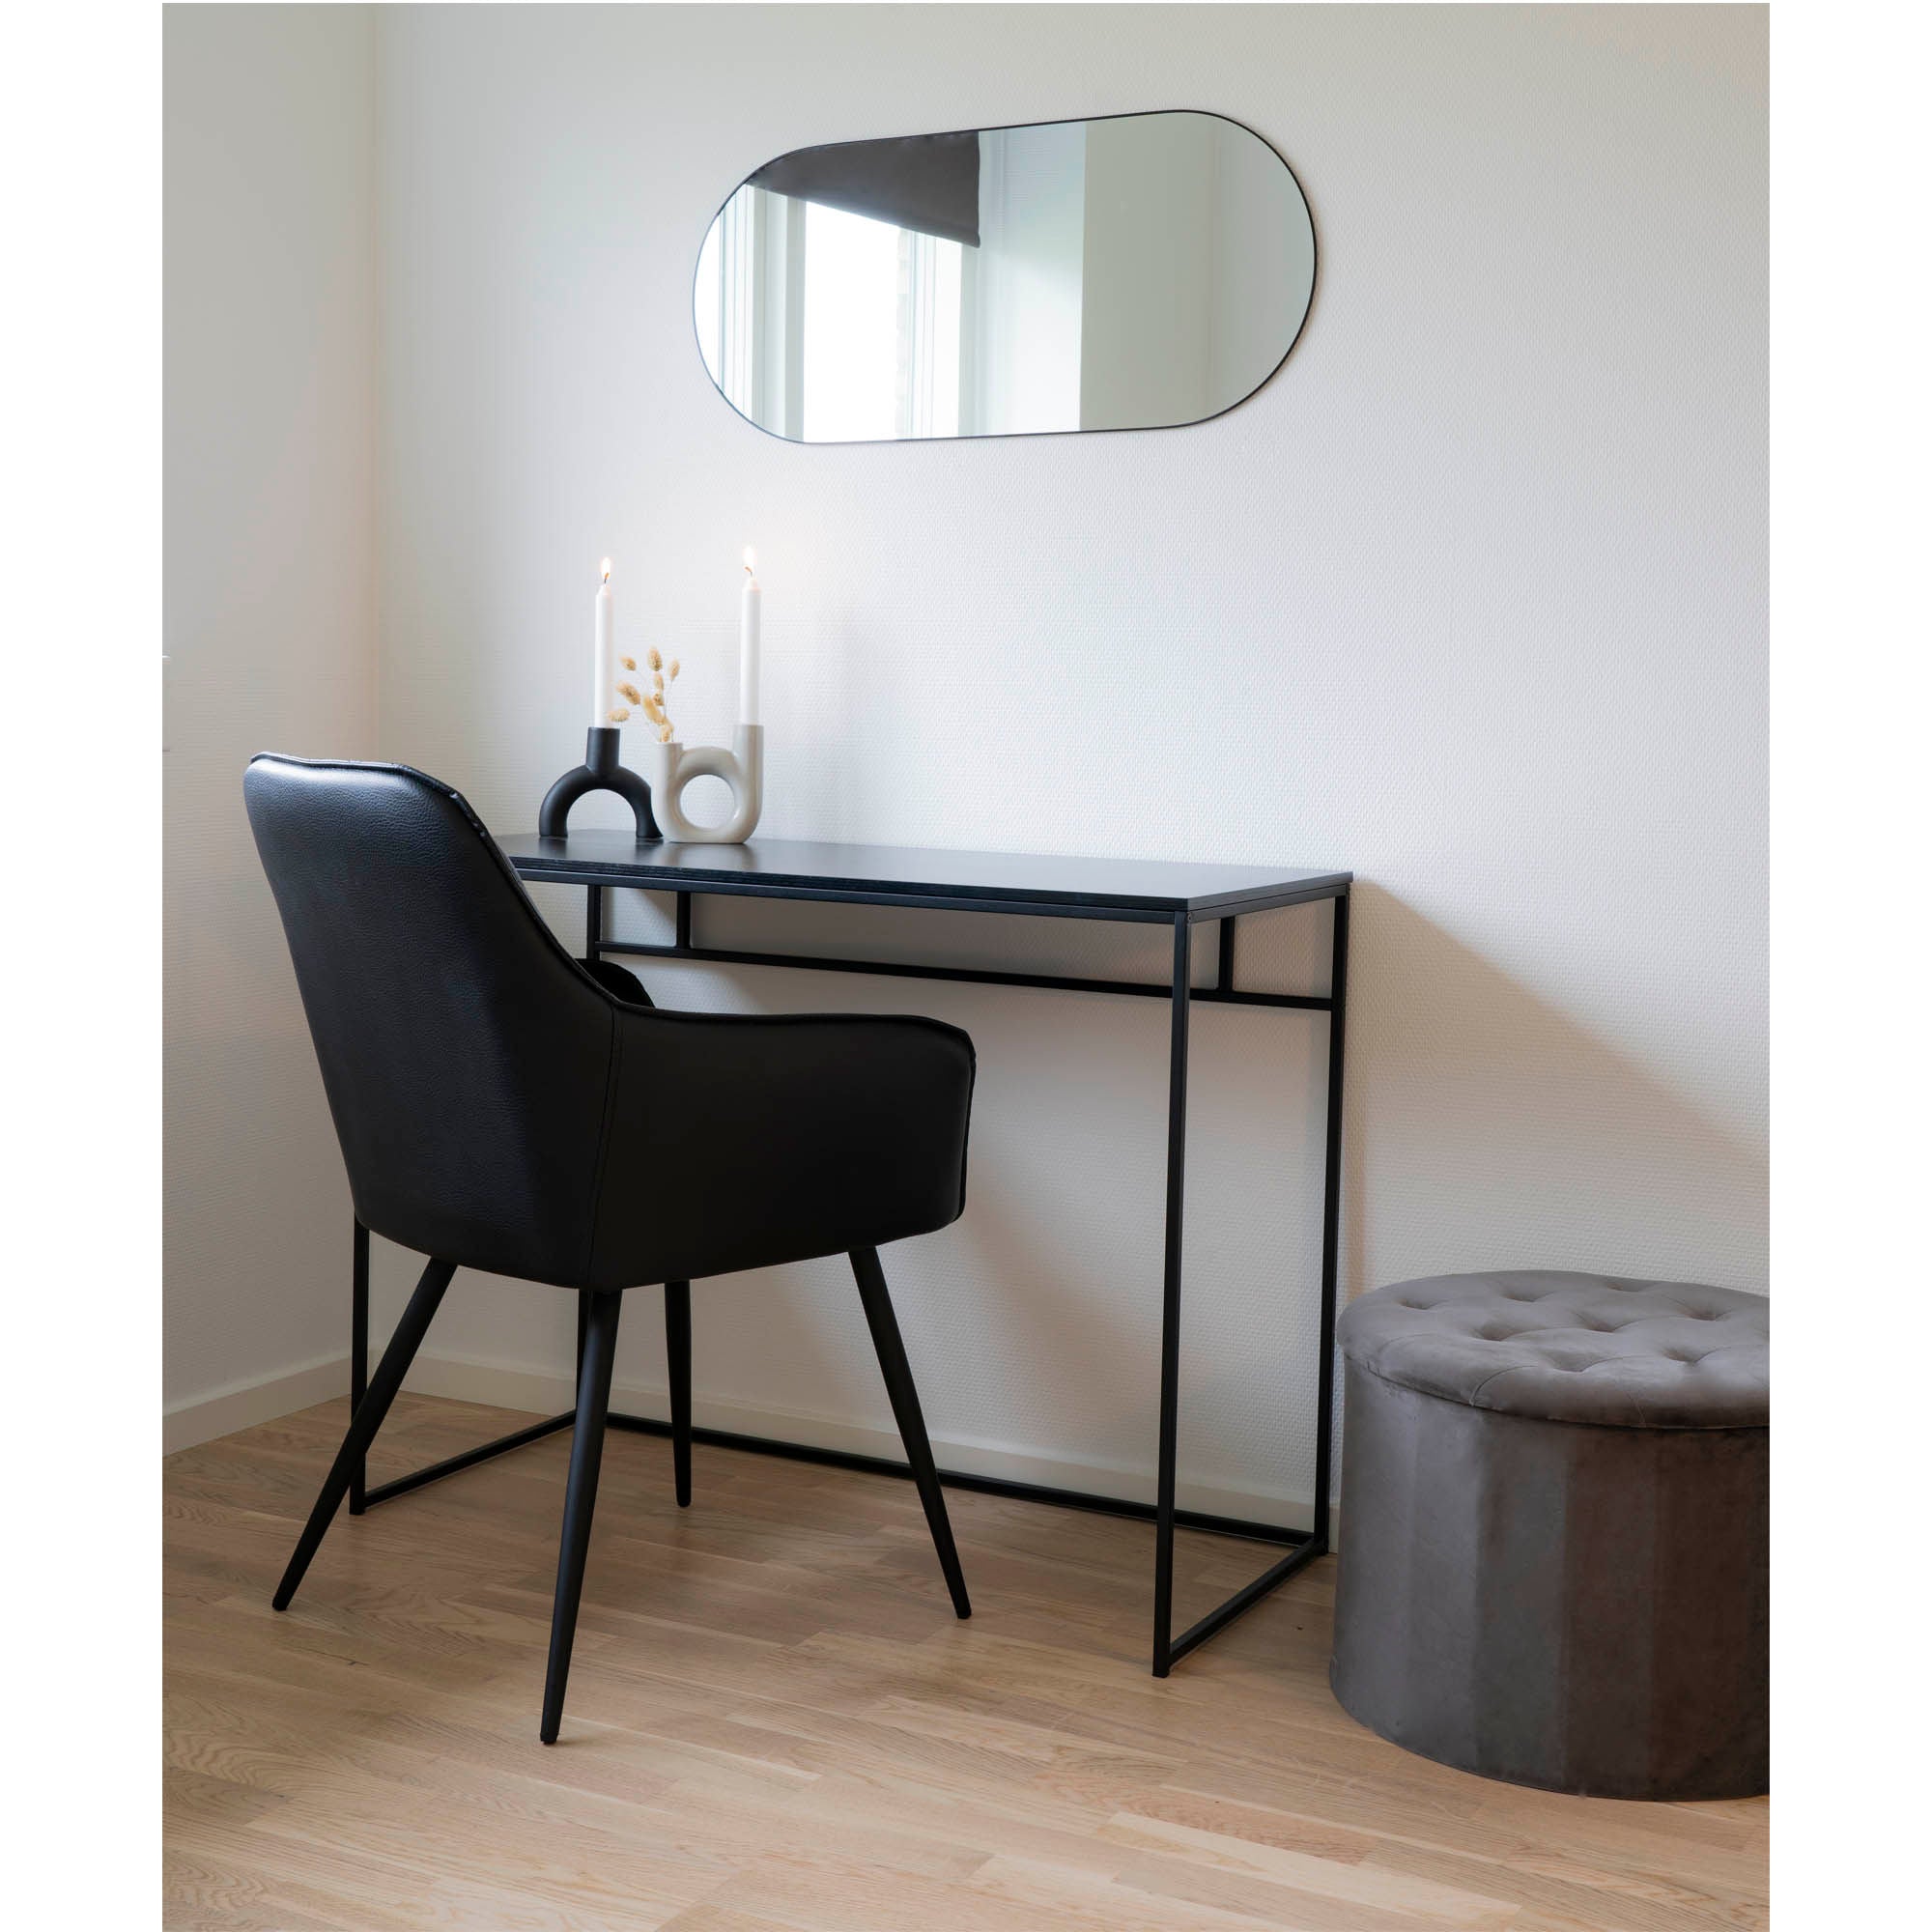 House Nordic Jersey Mirror Oval